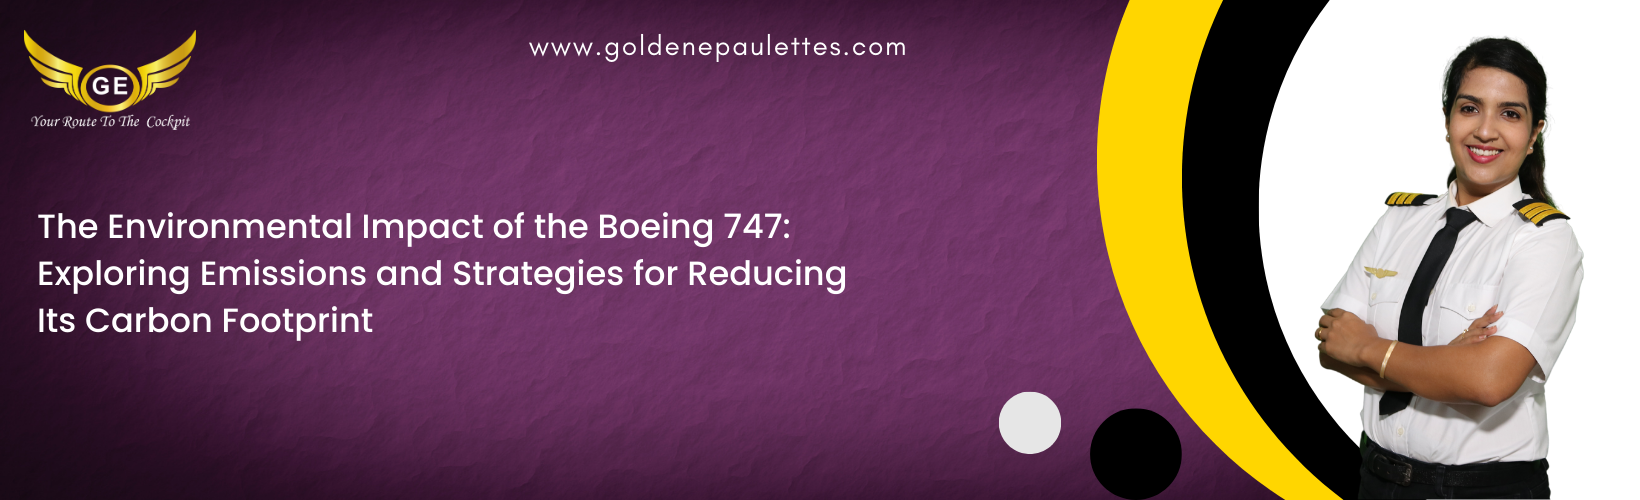 The Environmental Impact of the Boeing 747